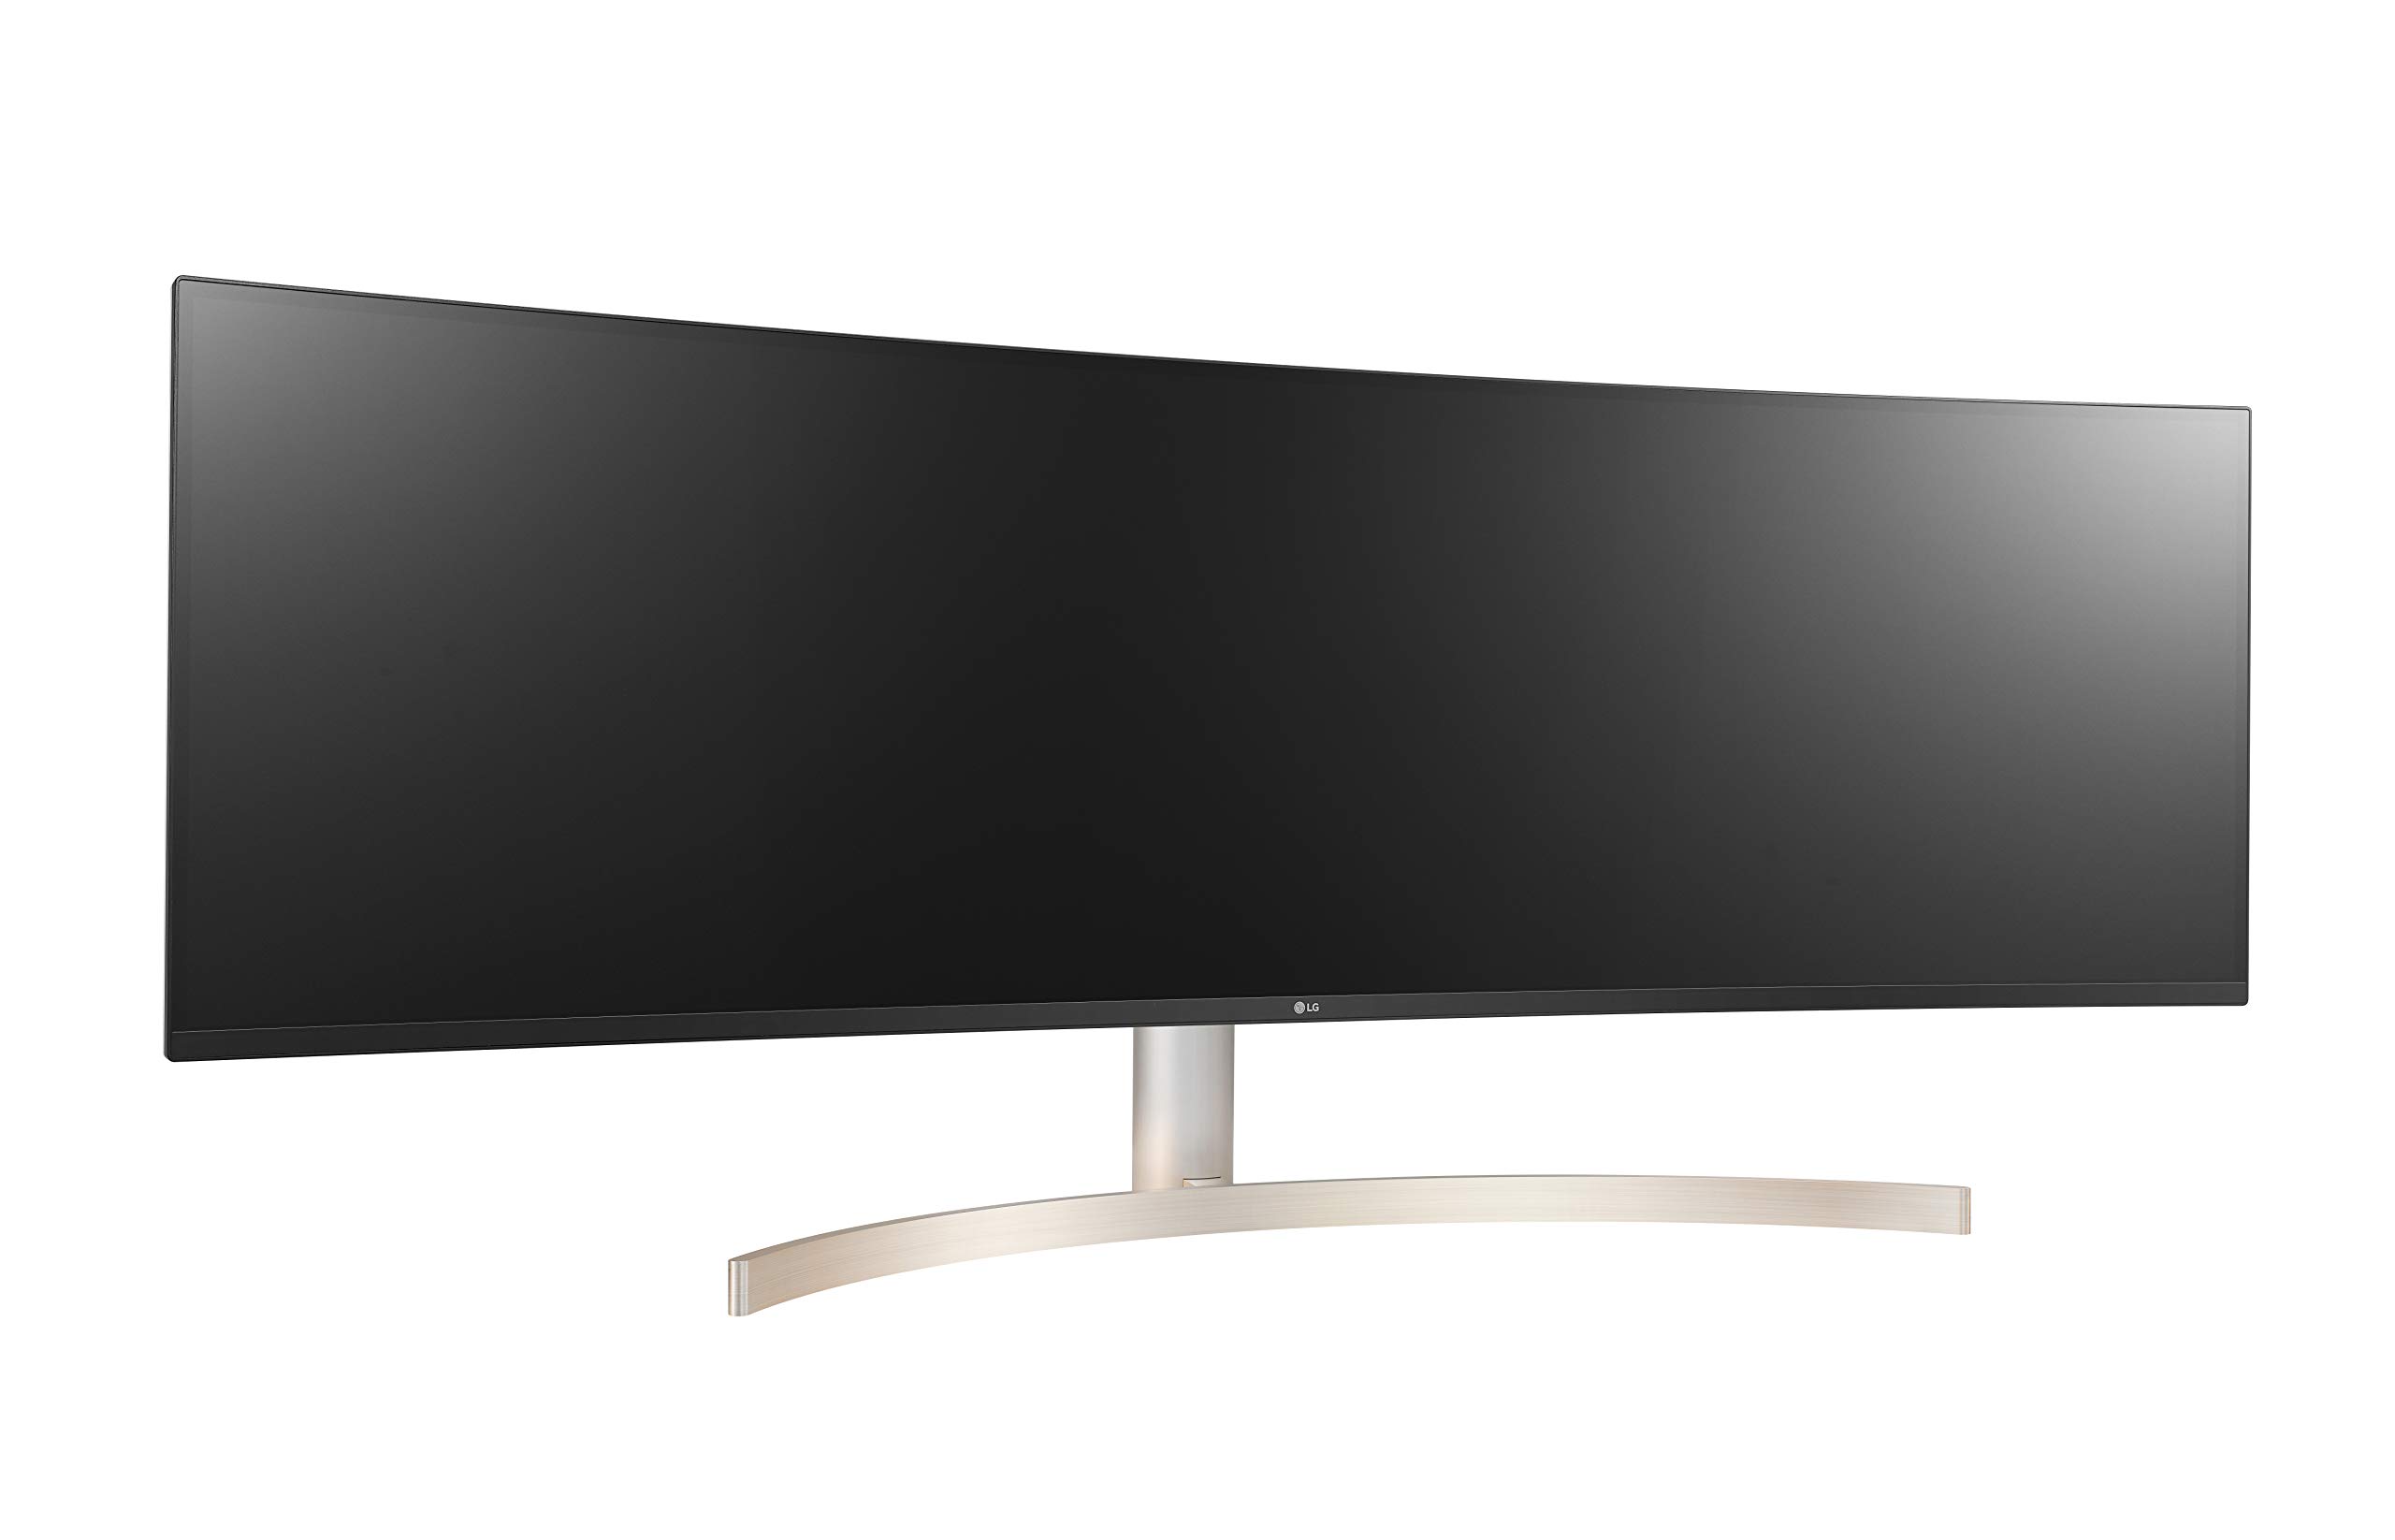 LG 49WL95C-WY 32:9 UltraWide Monitor 49" Dual DQHD (5120 x 1440) Curved IPS Display, HDR10, USB Type-C with 85W PD, sRGB 99% Color Gamut, Height/Swivel/Tilt Adjustable Stand - Black and Silver